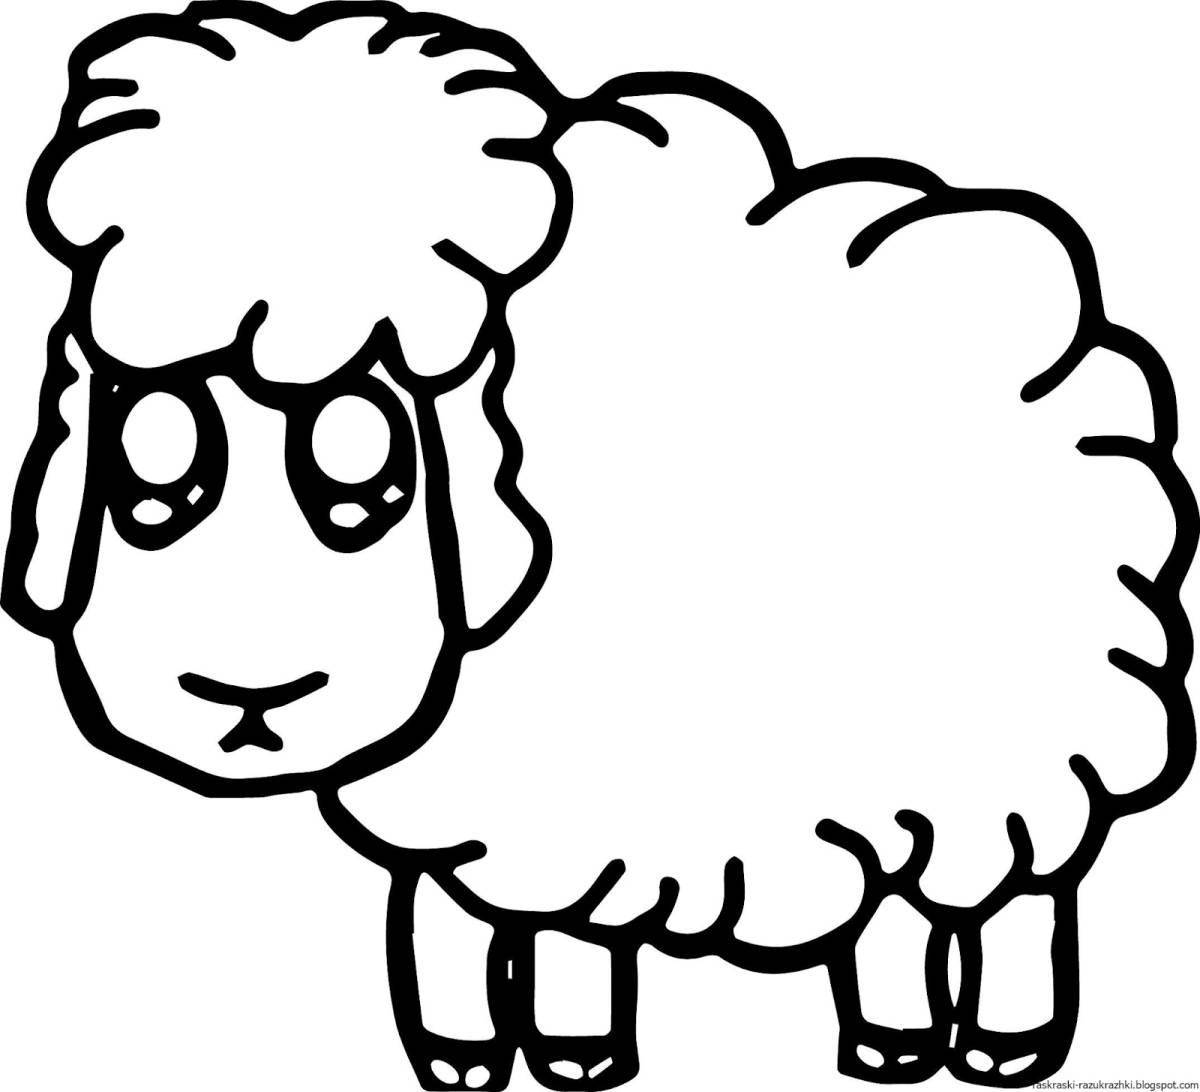 Coloring cute sheep for children 4-5 years old